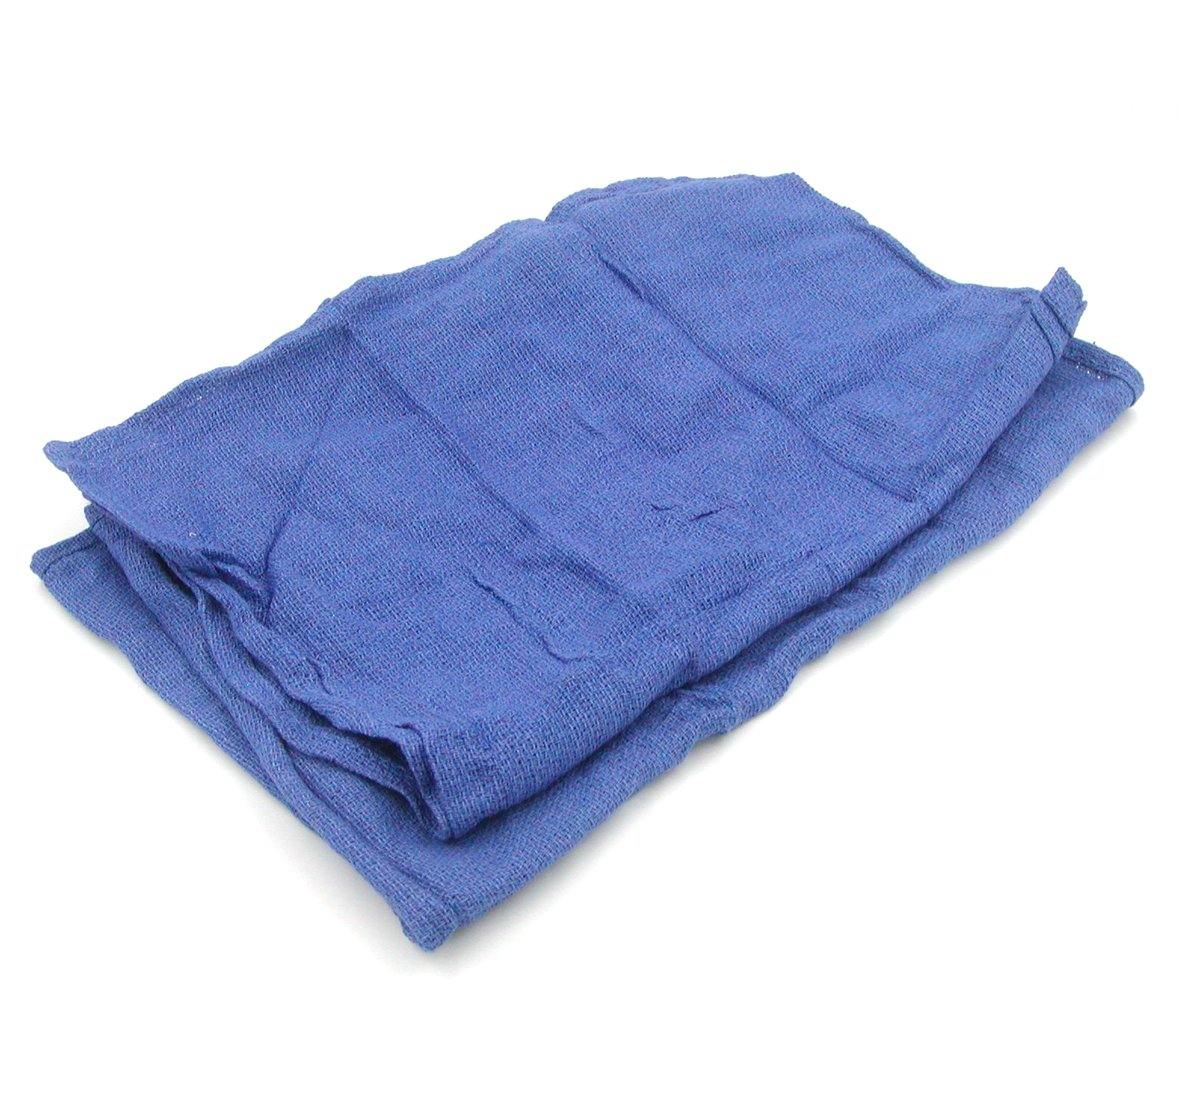 Learn All About Surgical Towels – A&A Wiping Cloth